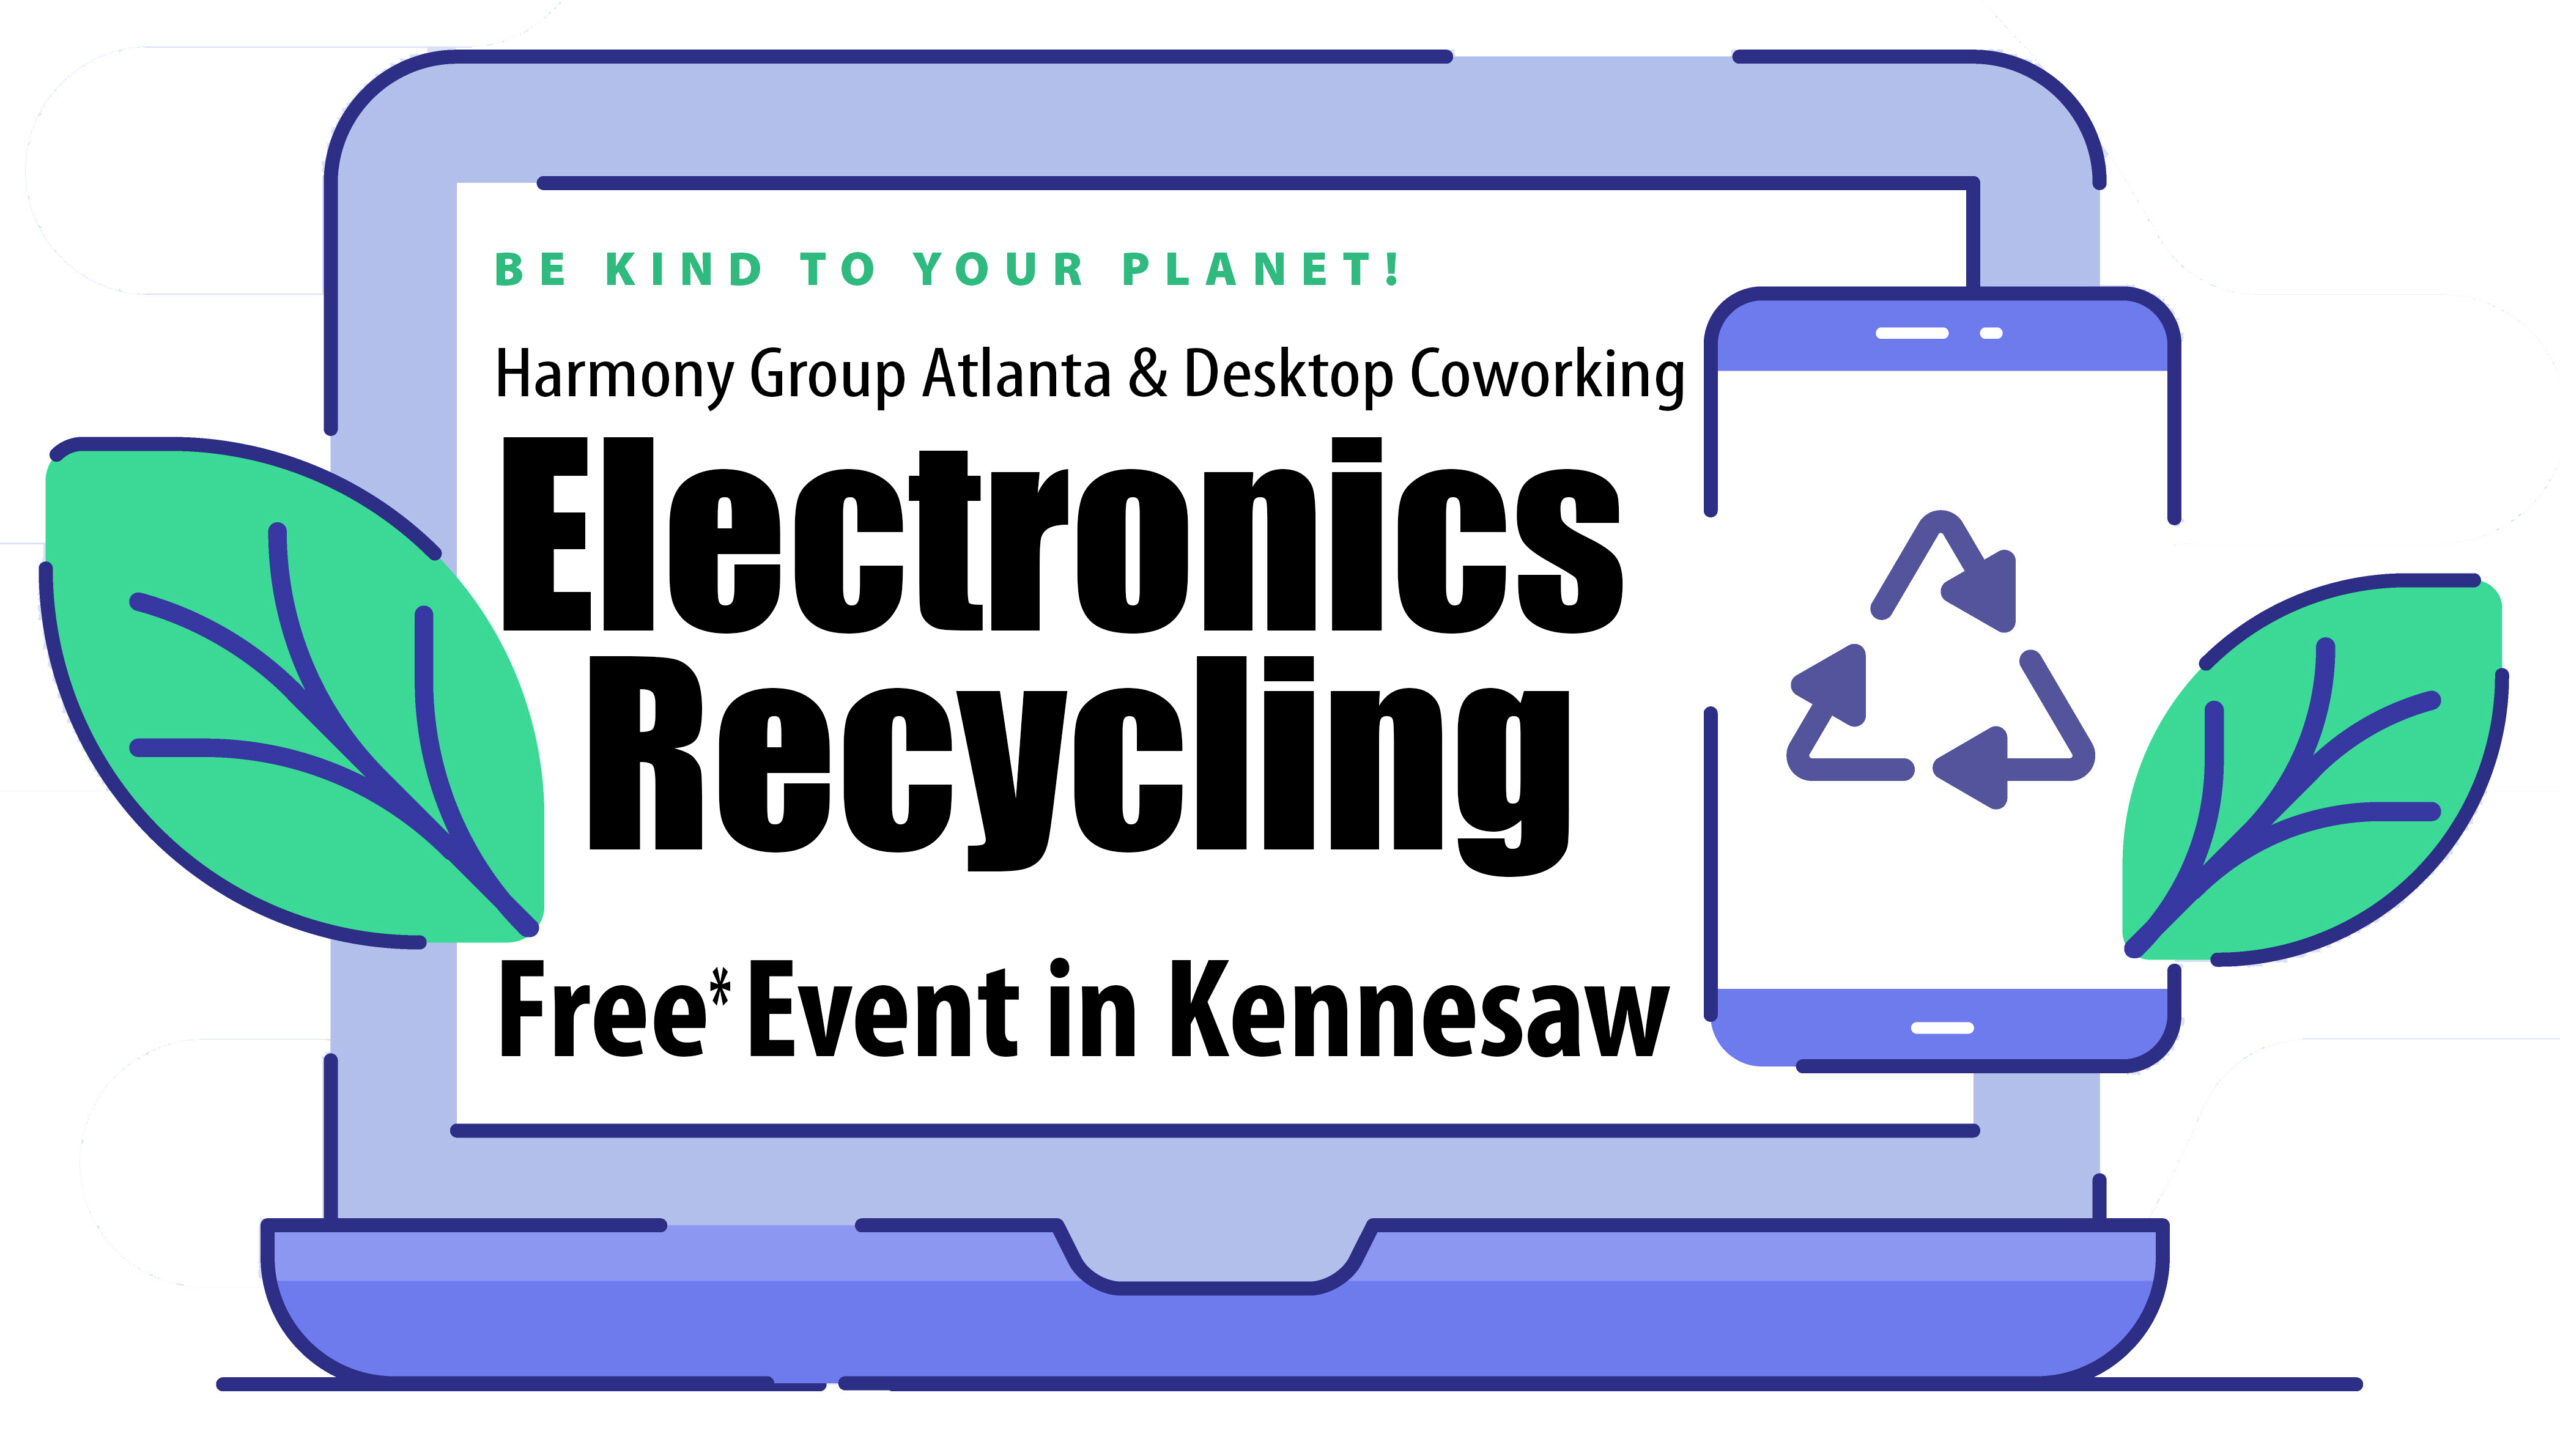 Be Kind To Your Planet! Harmony Group Atlanta & Desktop Coworking Electronics Recycling Free* Event in Kennesaw